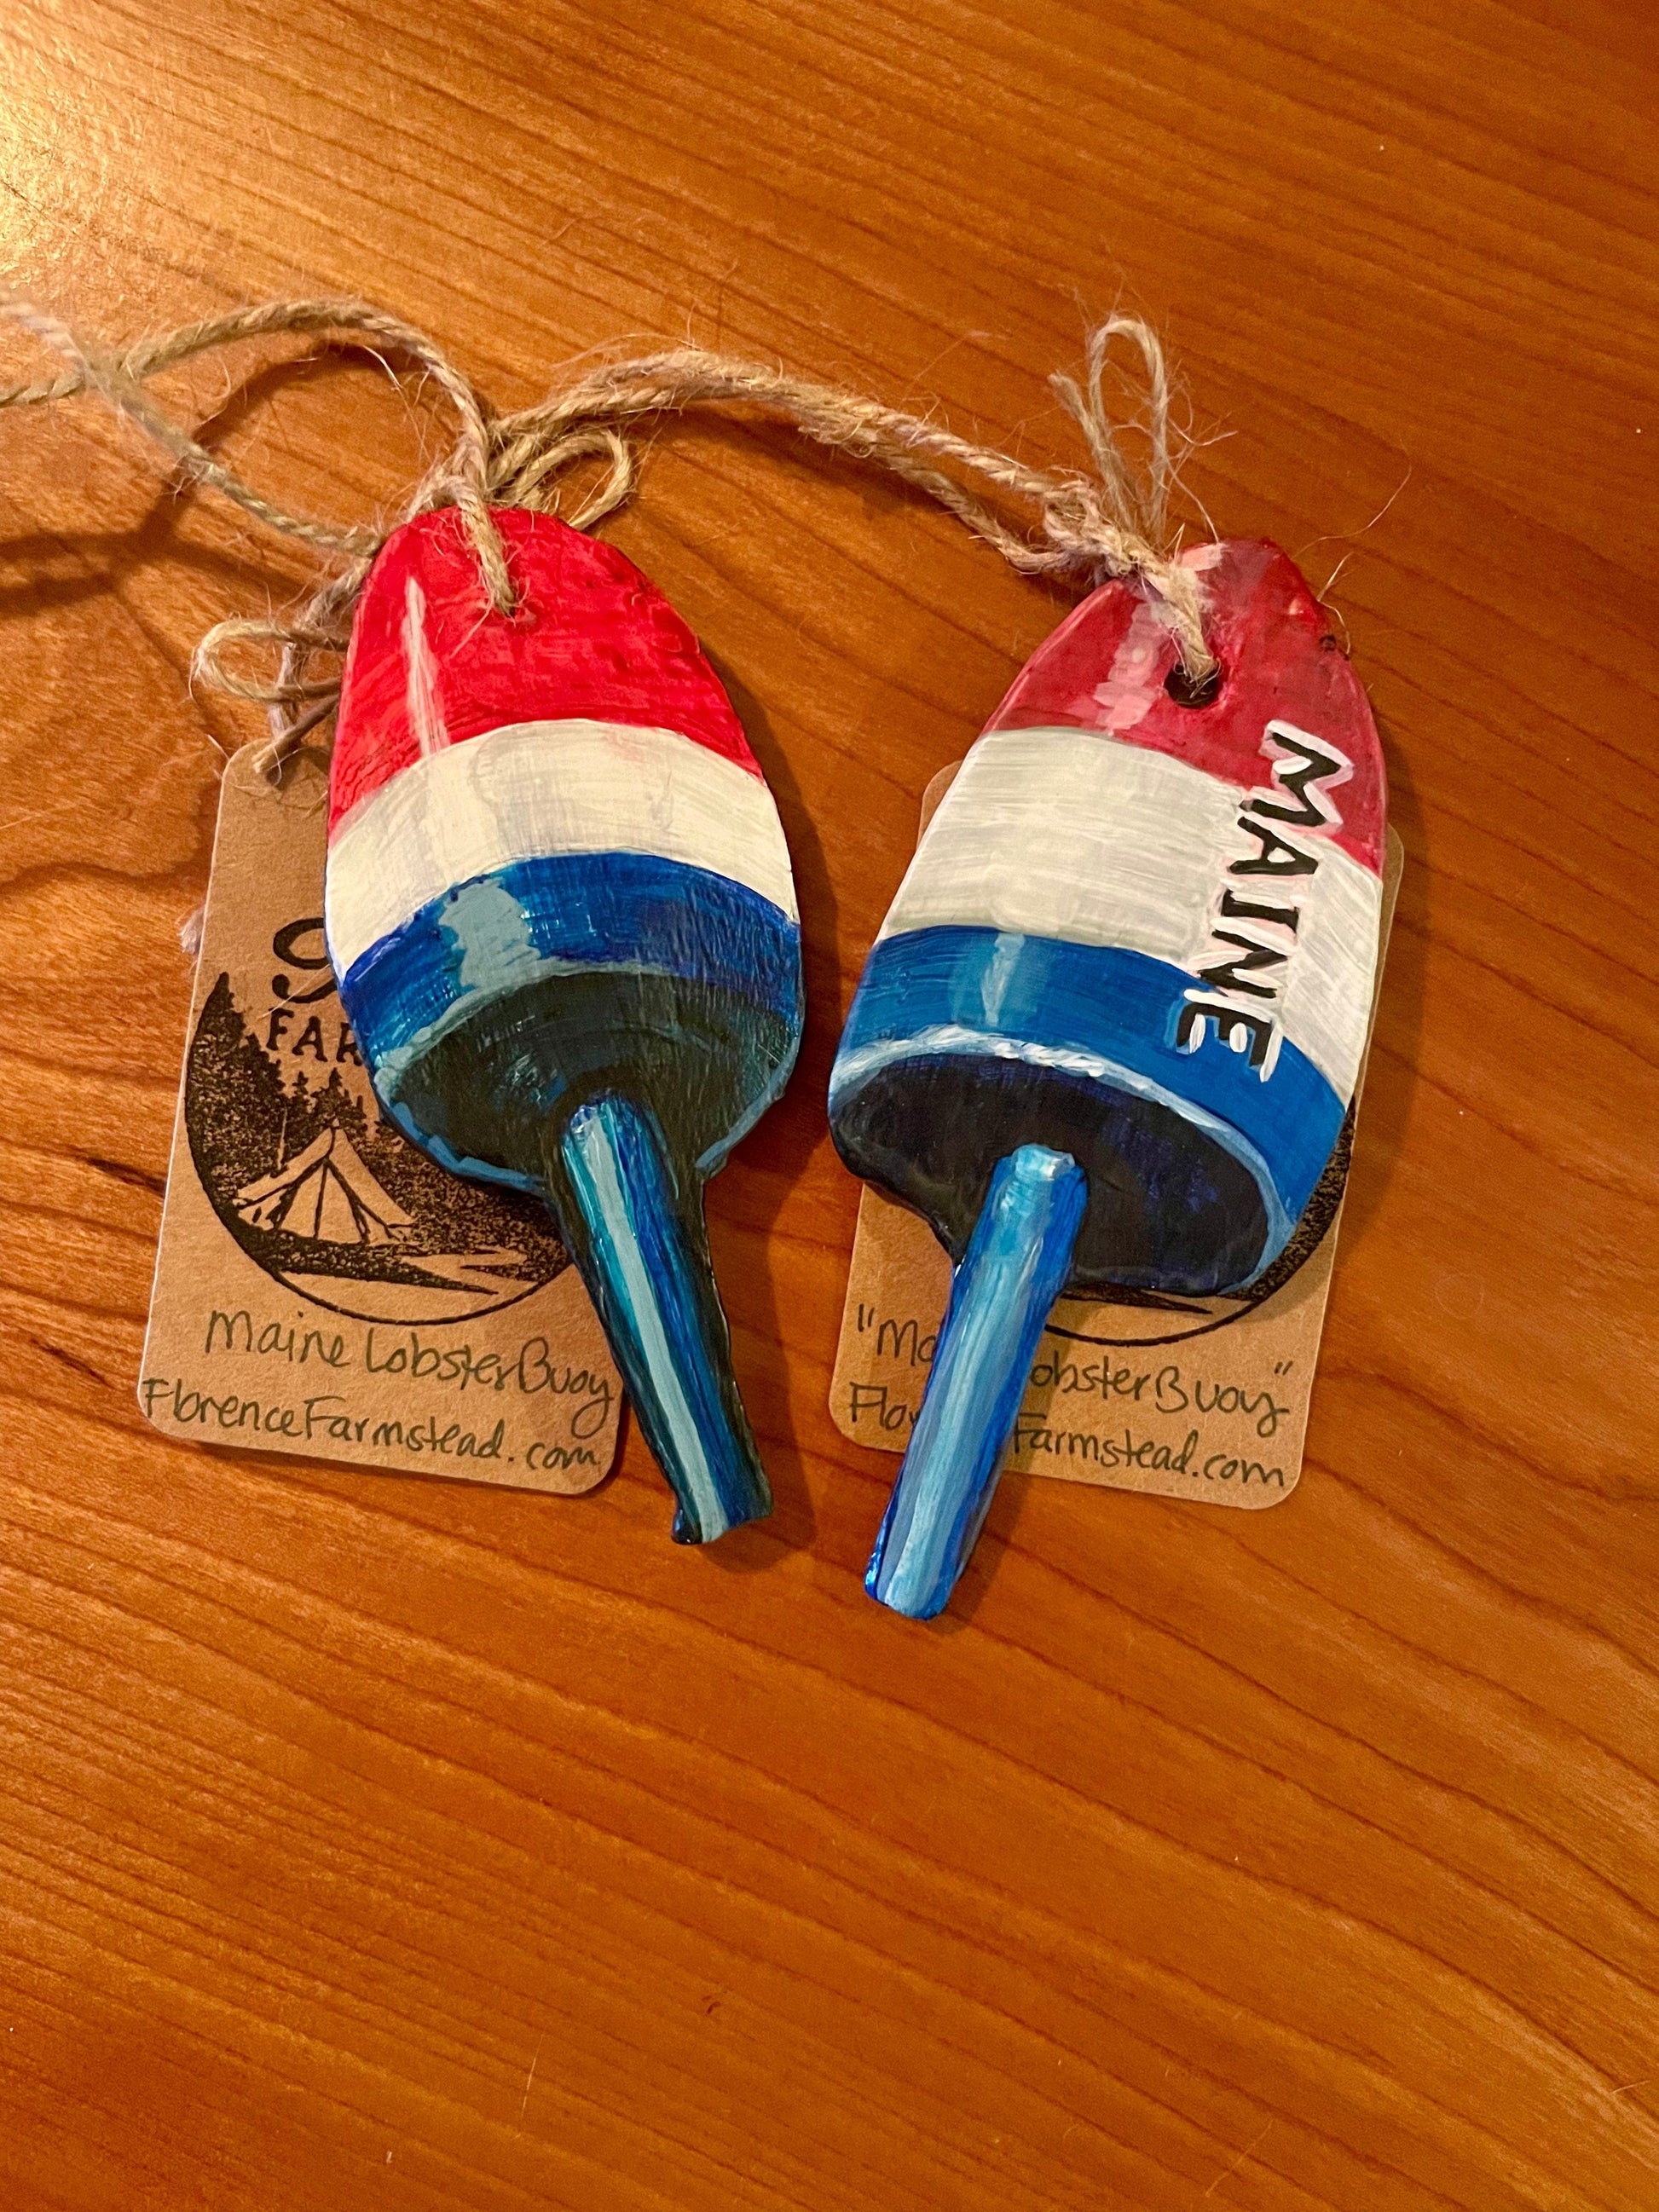 Maine lobster buoy clay ornament made by brandy cressey at Florence Farmstead